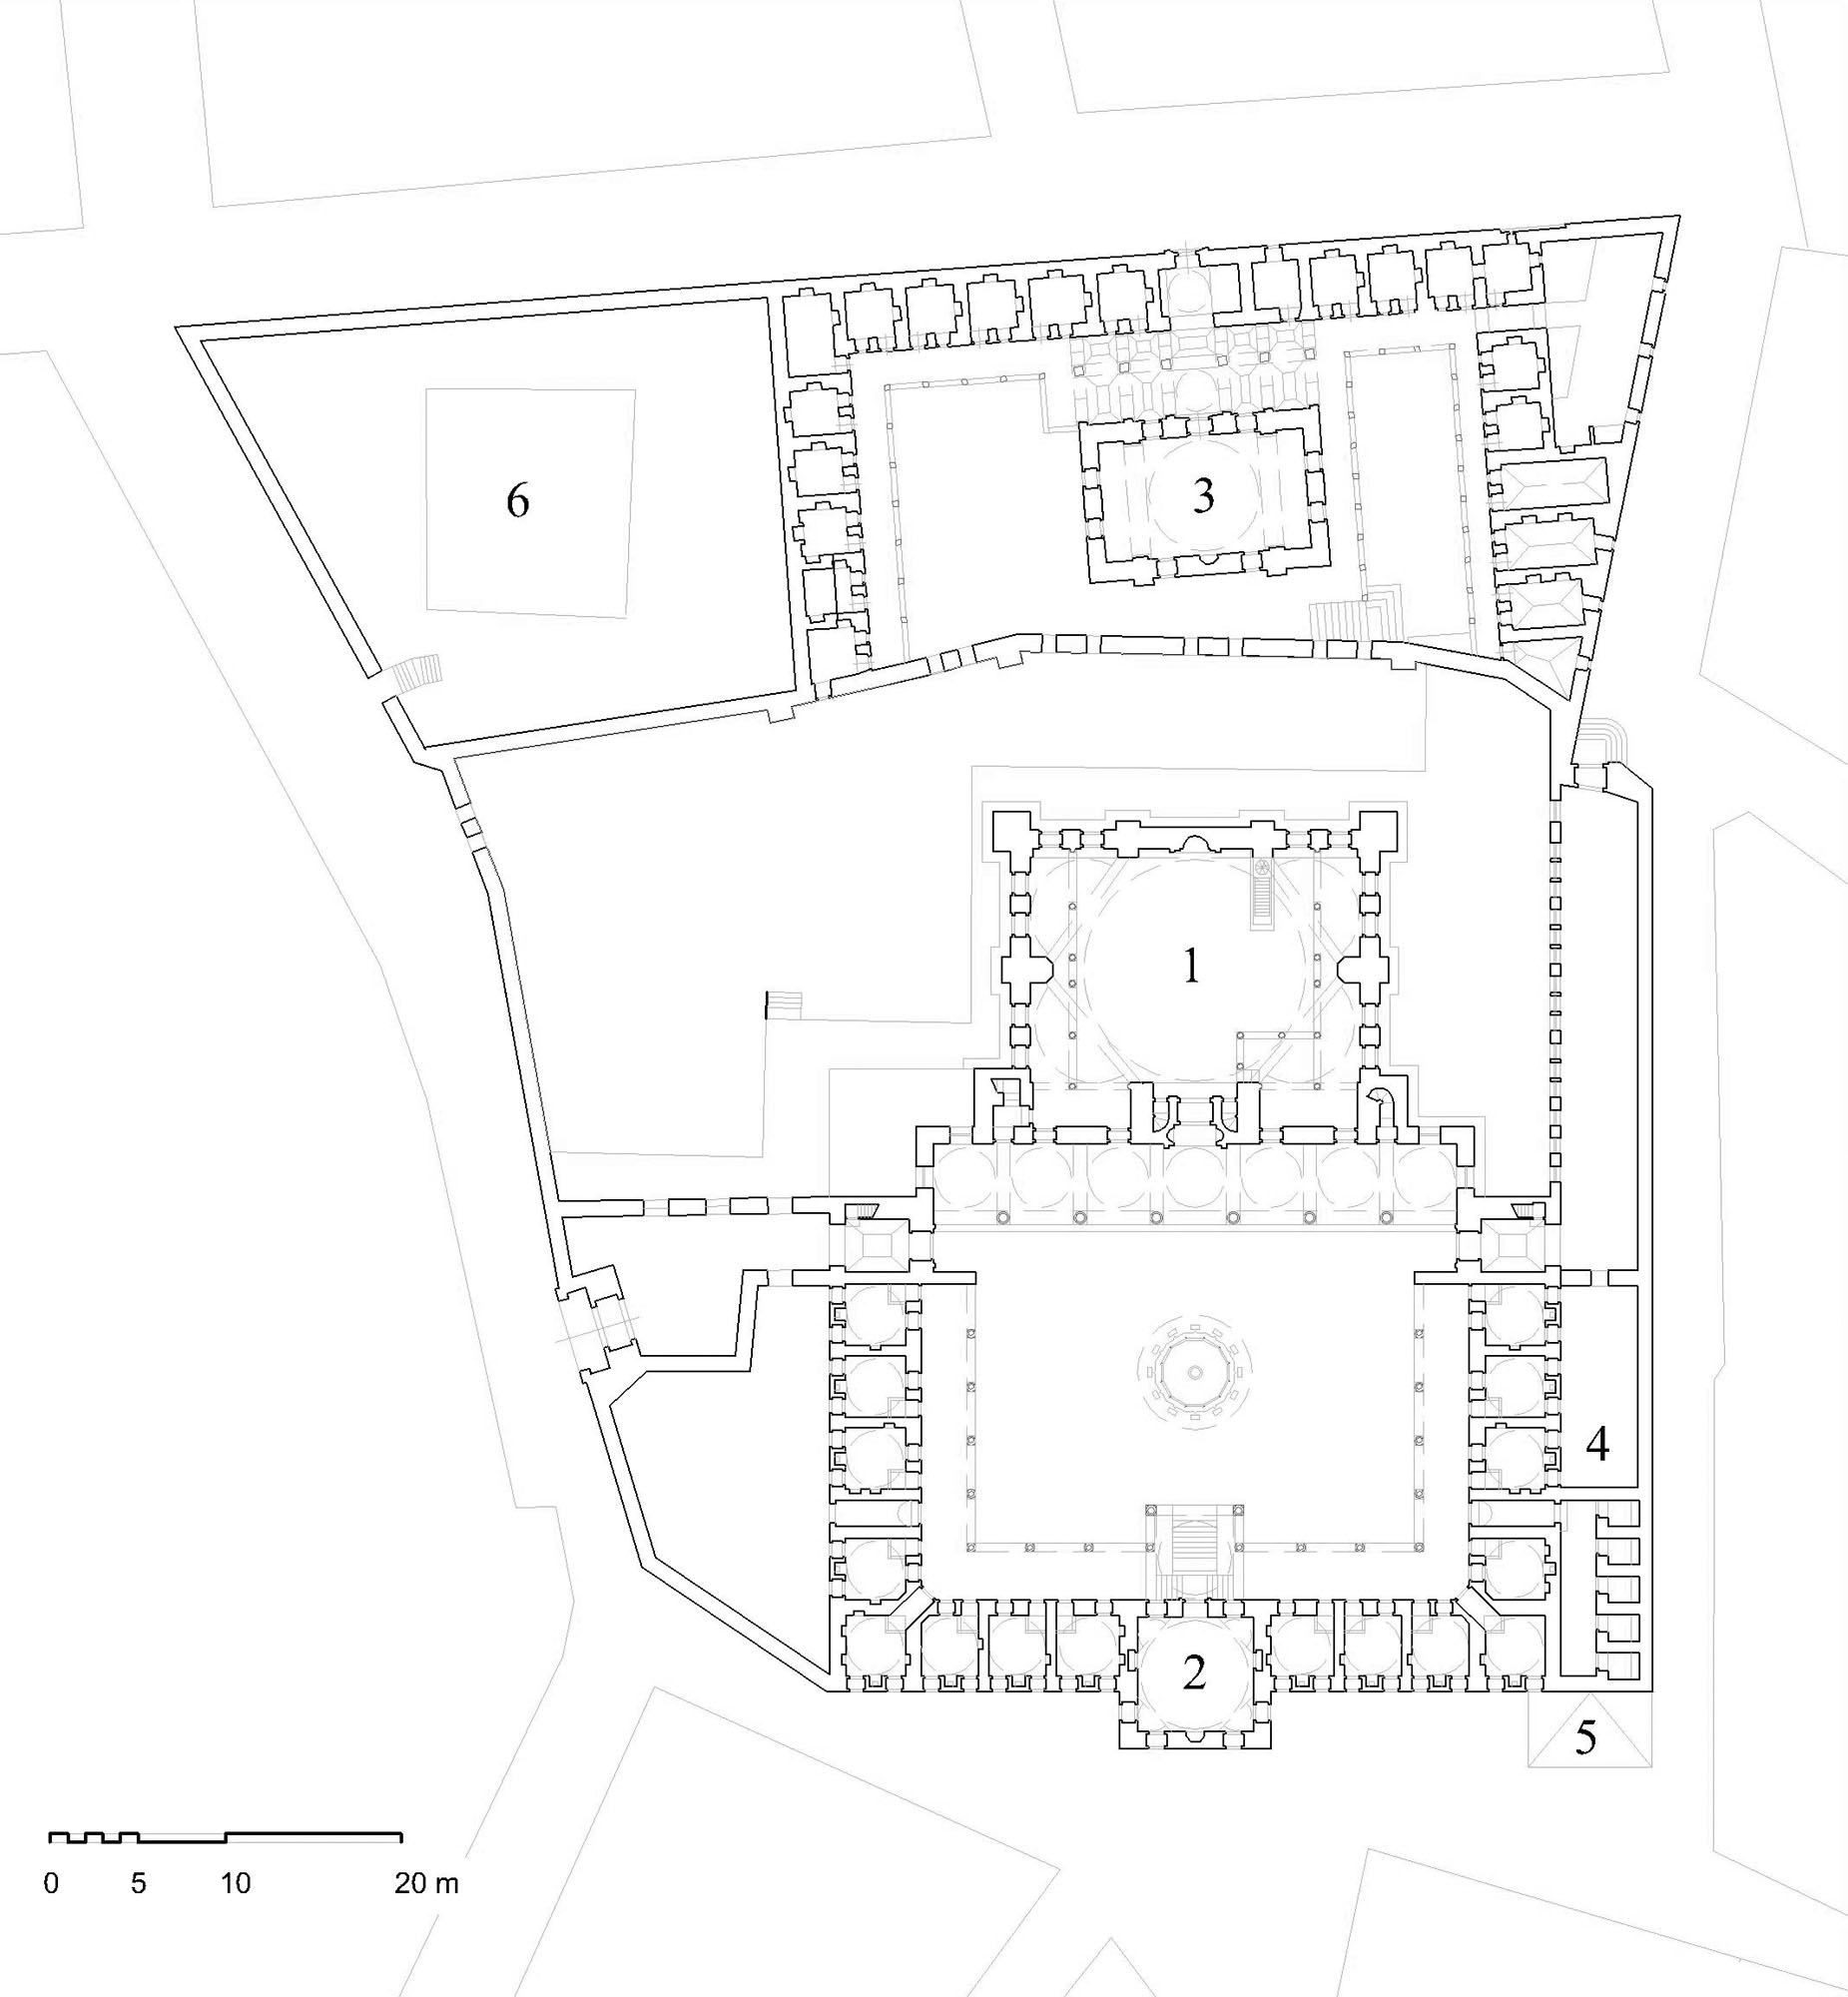 Sokullu Mehmet Paşa ve Ismihan Sultan Külliyesi (Kadırga) - Floor plan of complex showing (1) mosque, (2) madrasa, (3) convent, (4) latrines, (5) reservoir with street fountains, (6) pre-existing masjid of Helvacibasi Iskender. DWG file in AutoCAD 2000 format. Click the download button to download a zipped file containing the .dwg file.